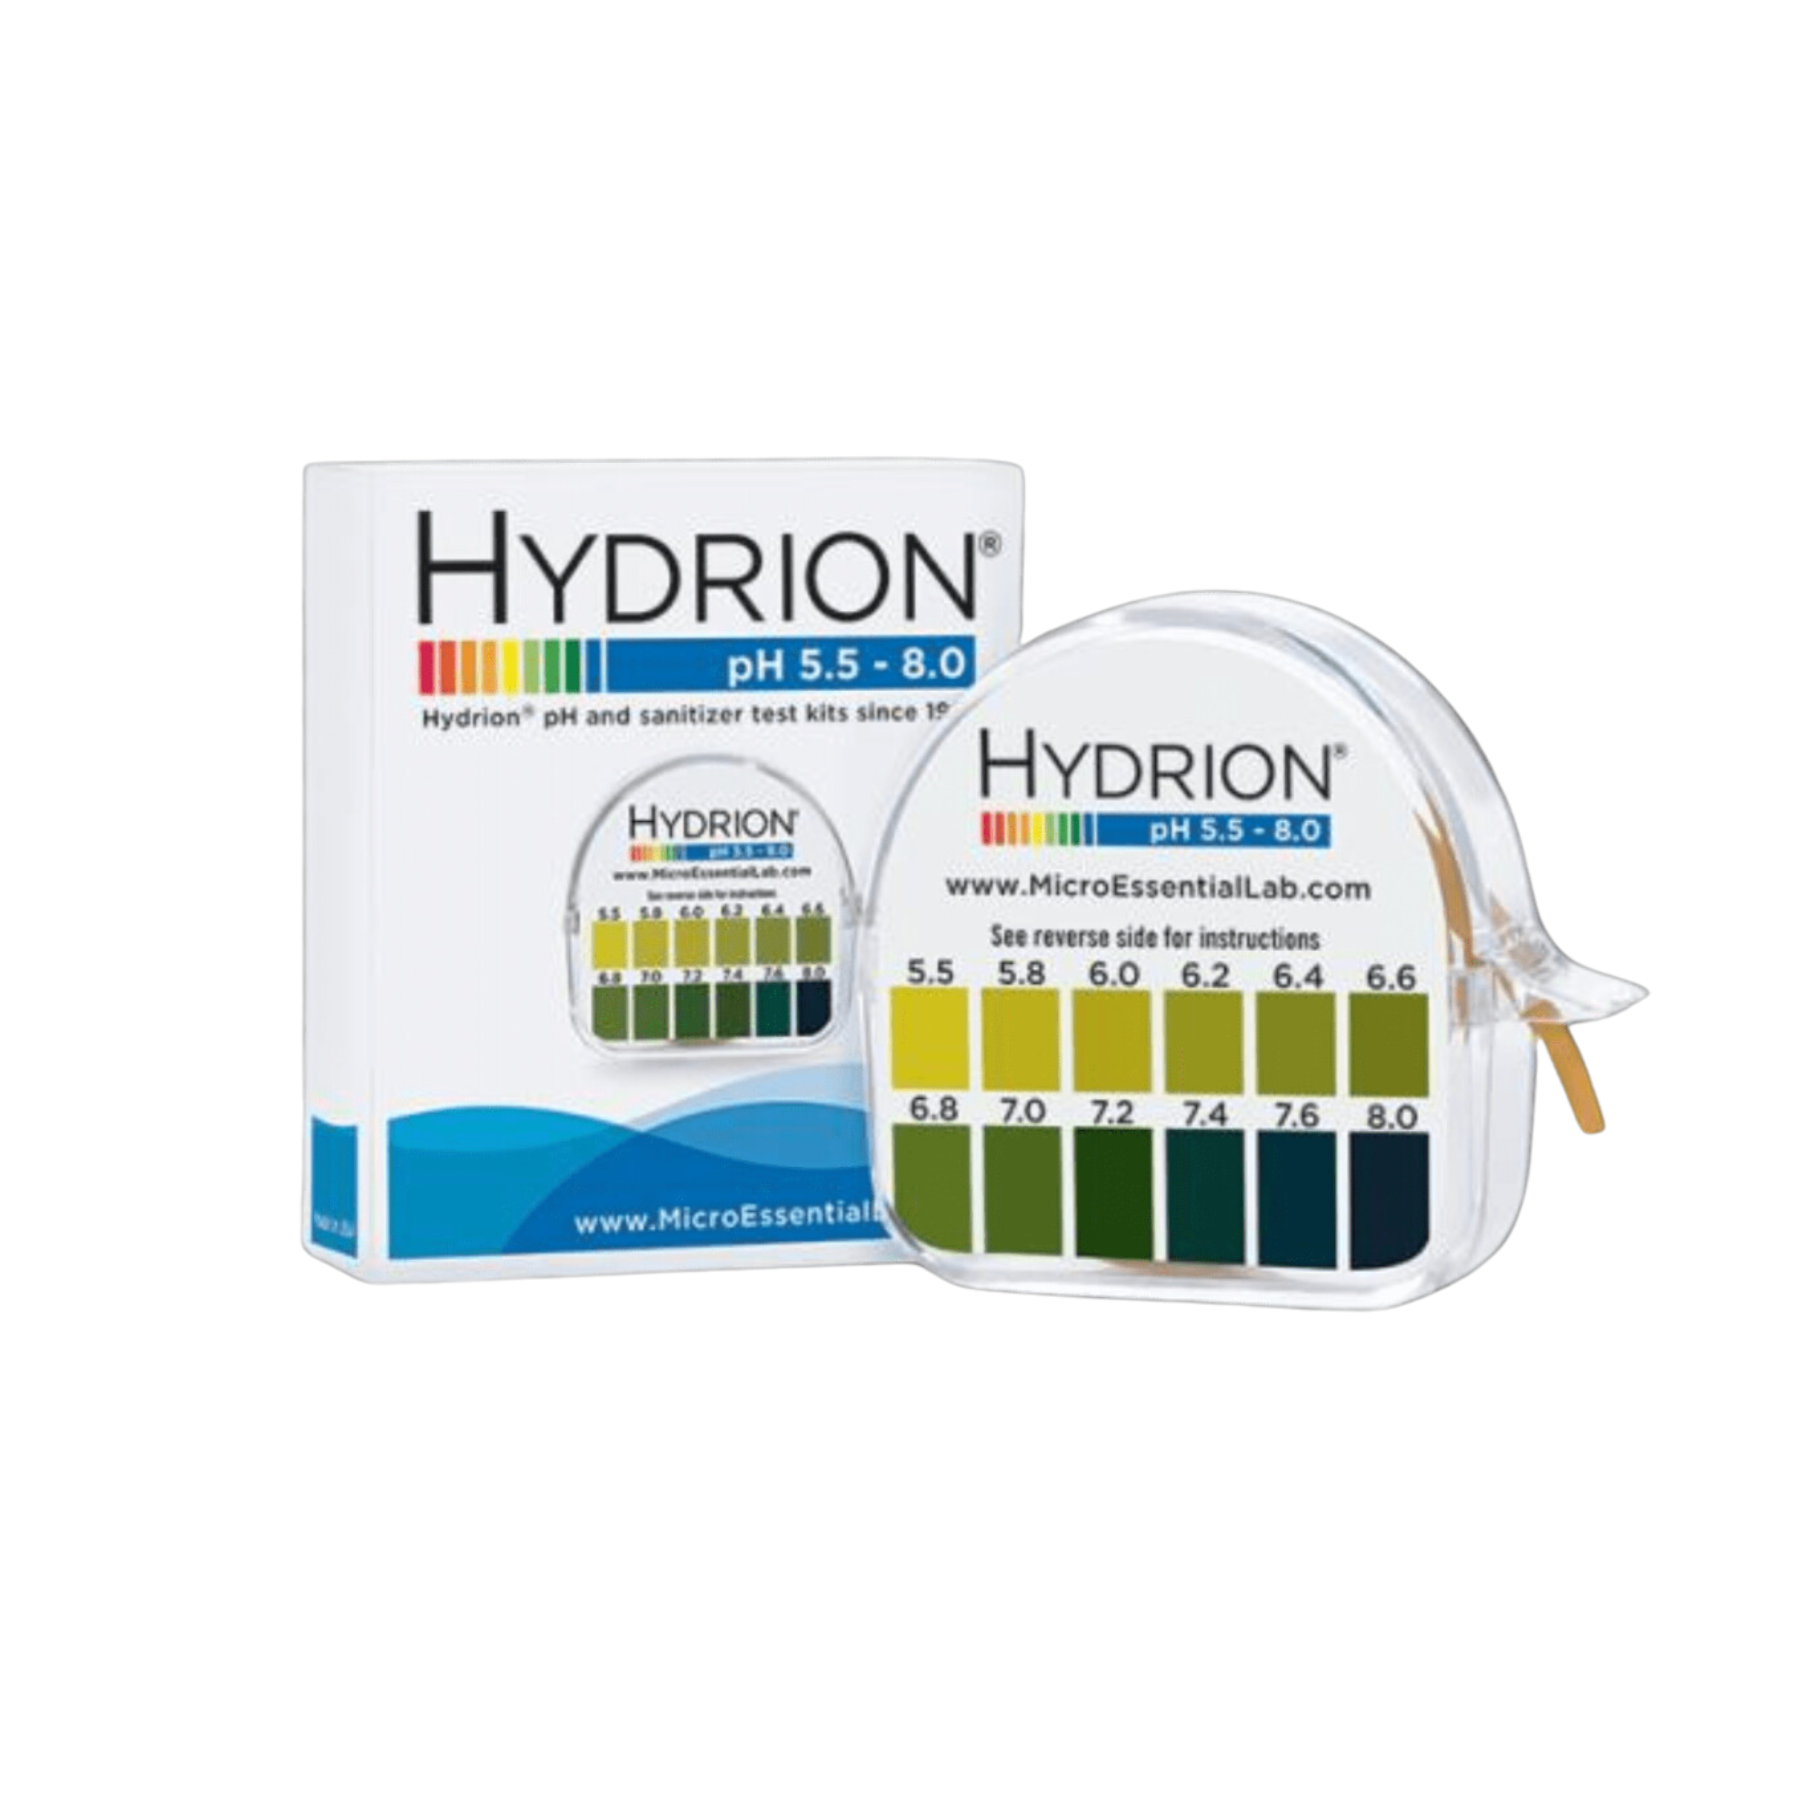 Premier Research Labs Hydrion pH Test Strips